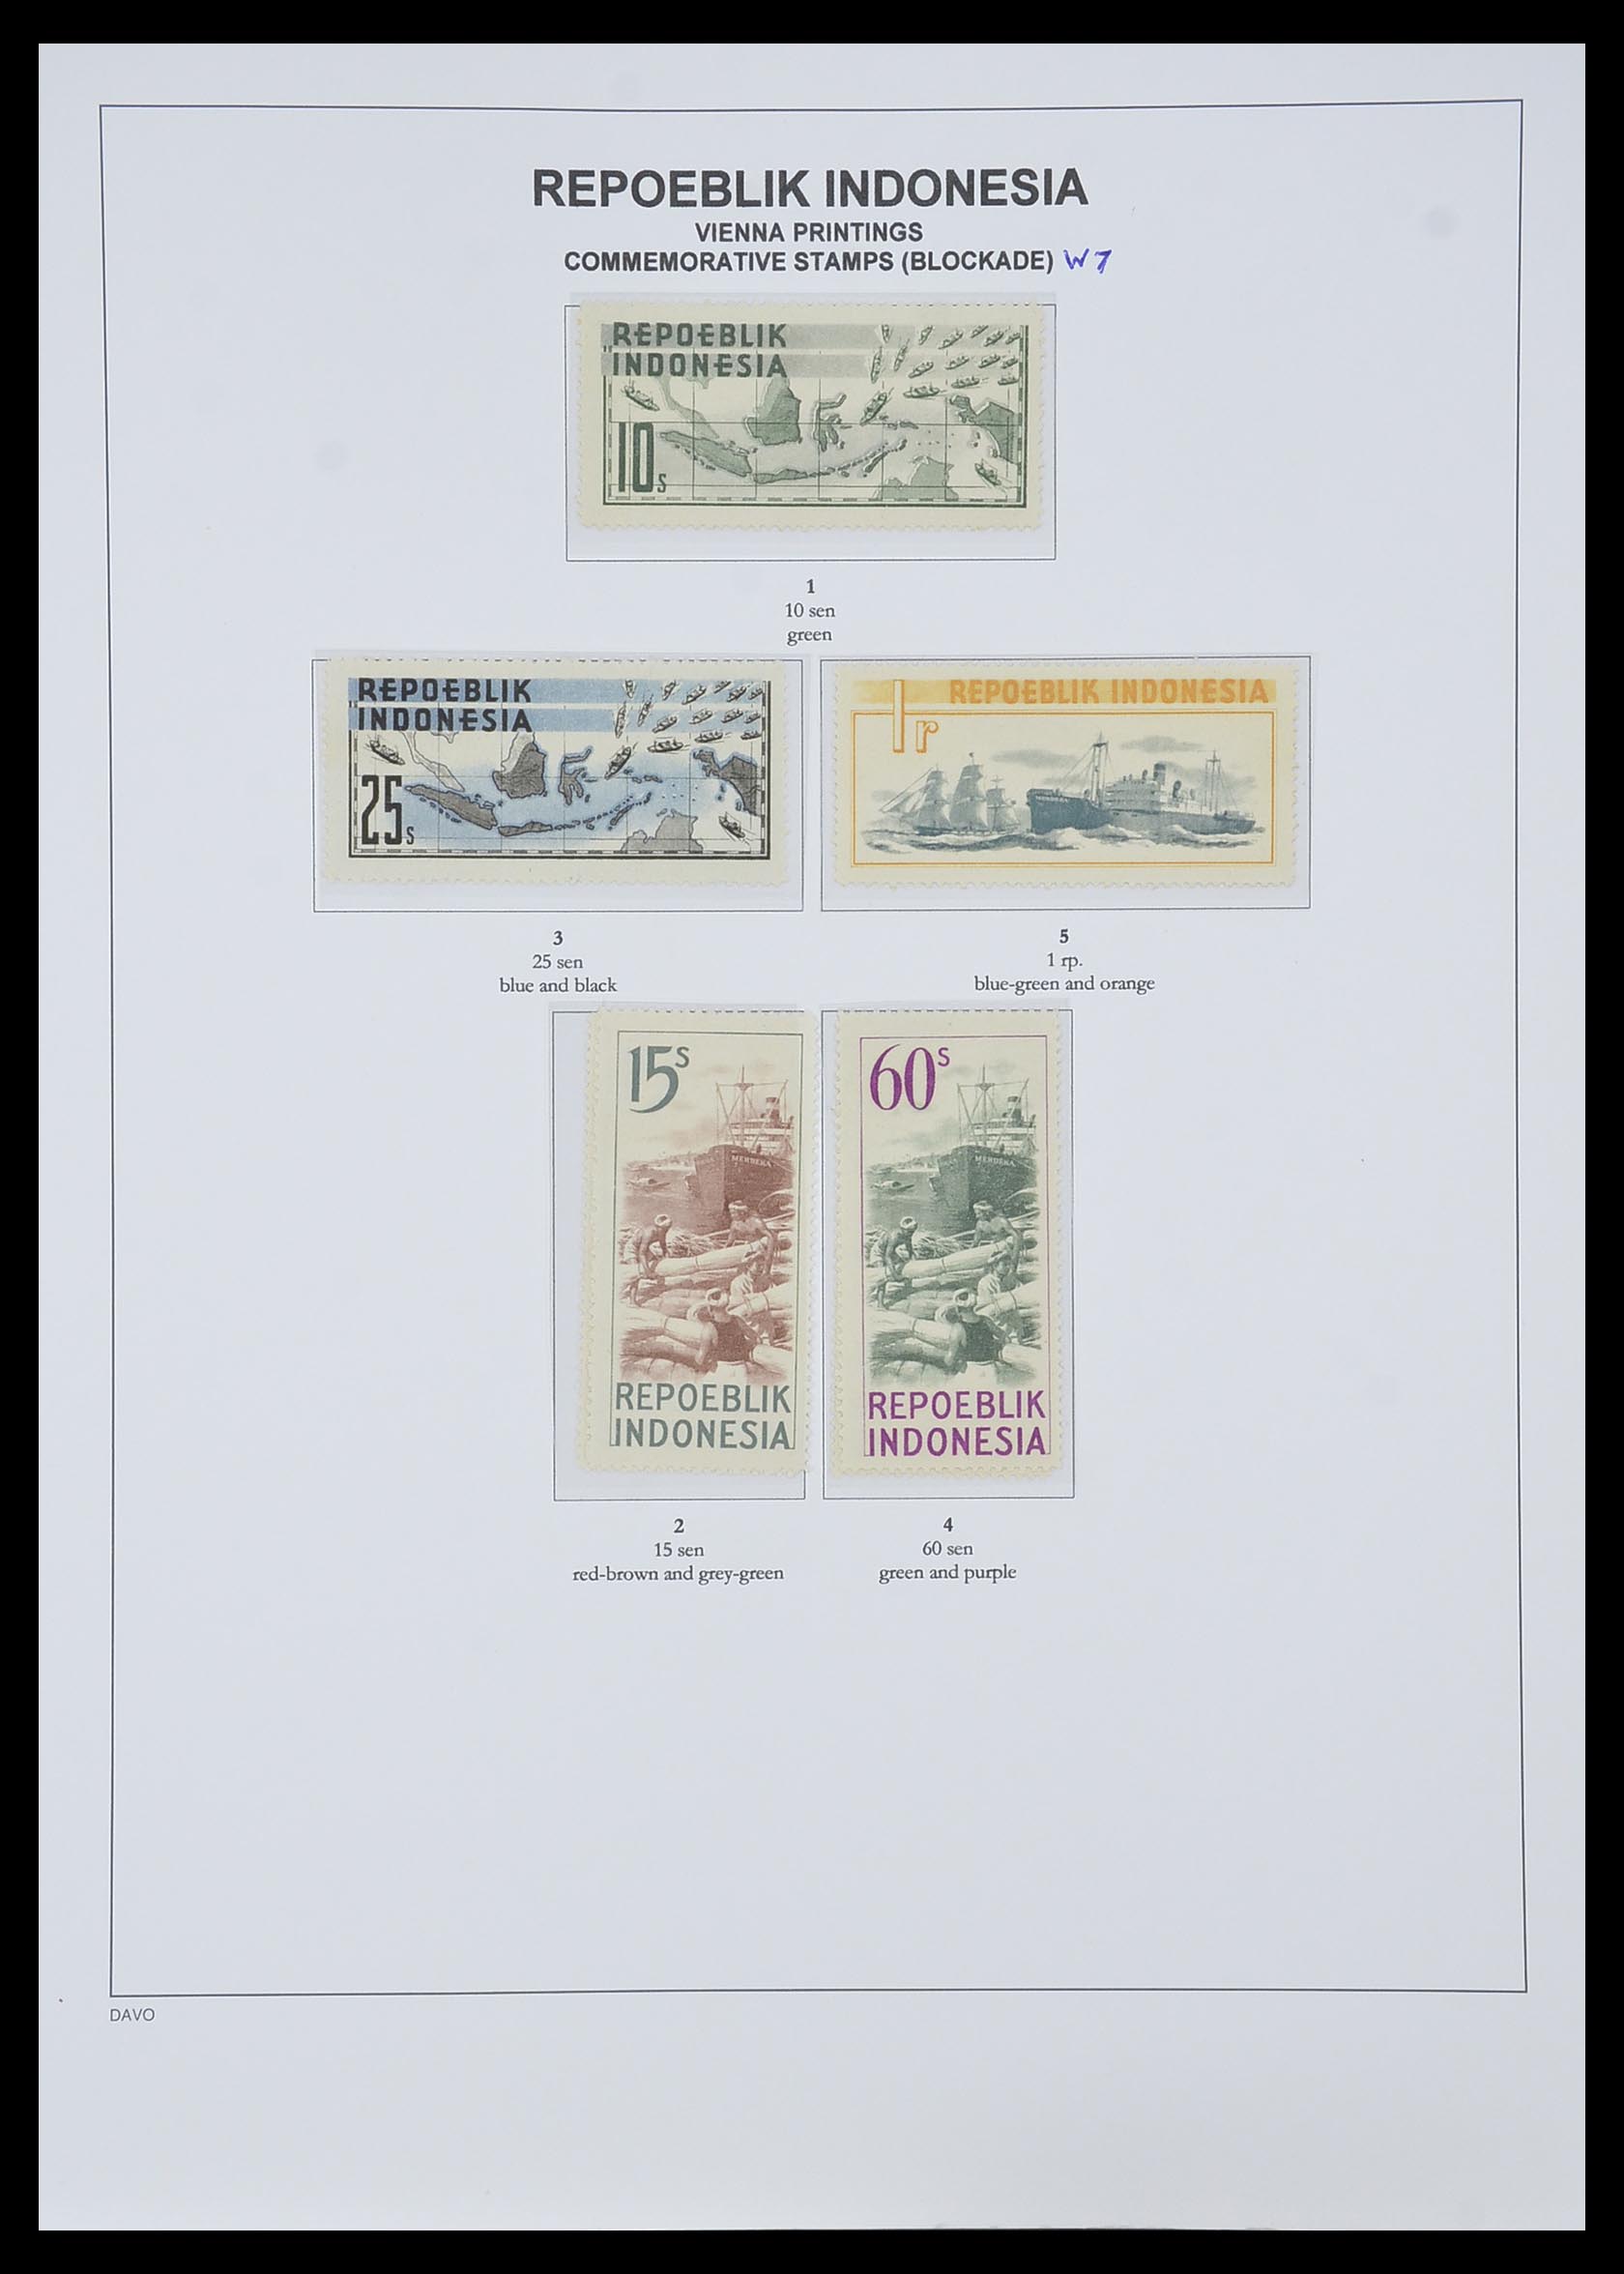 33988 015 - Stamp collection 33988 Vienna printings Indonesia.